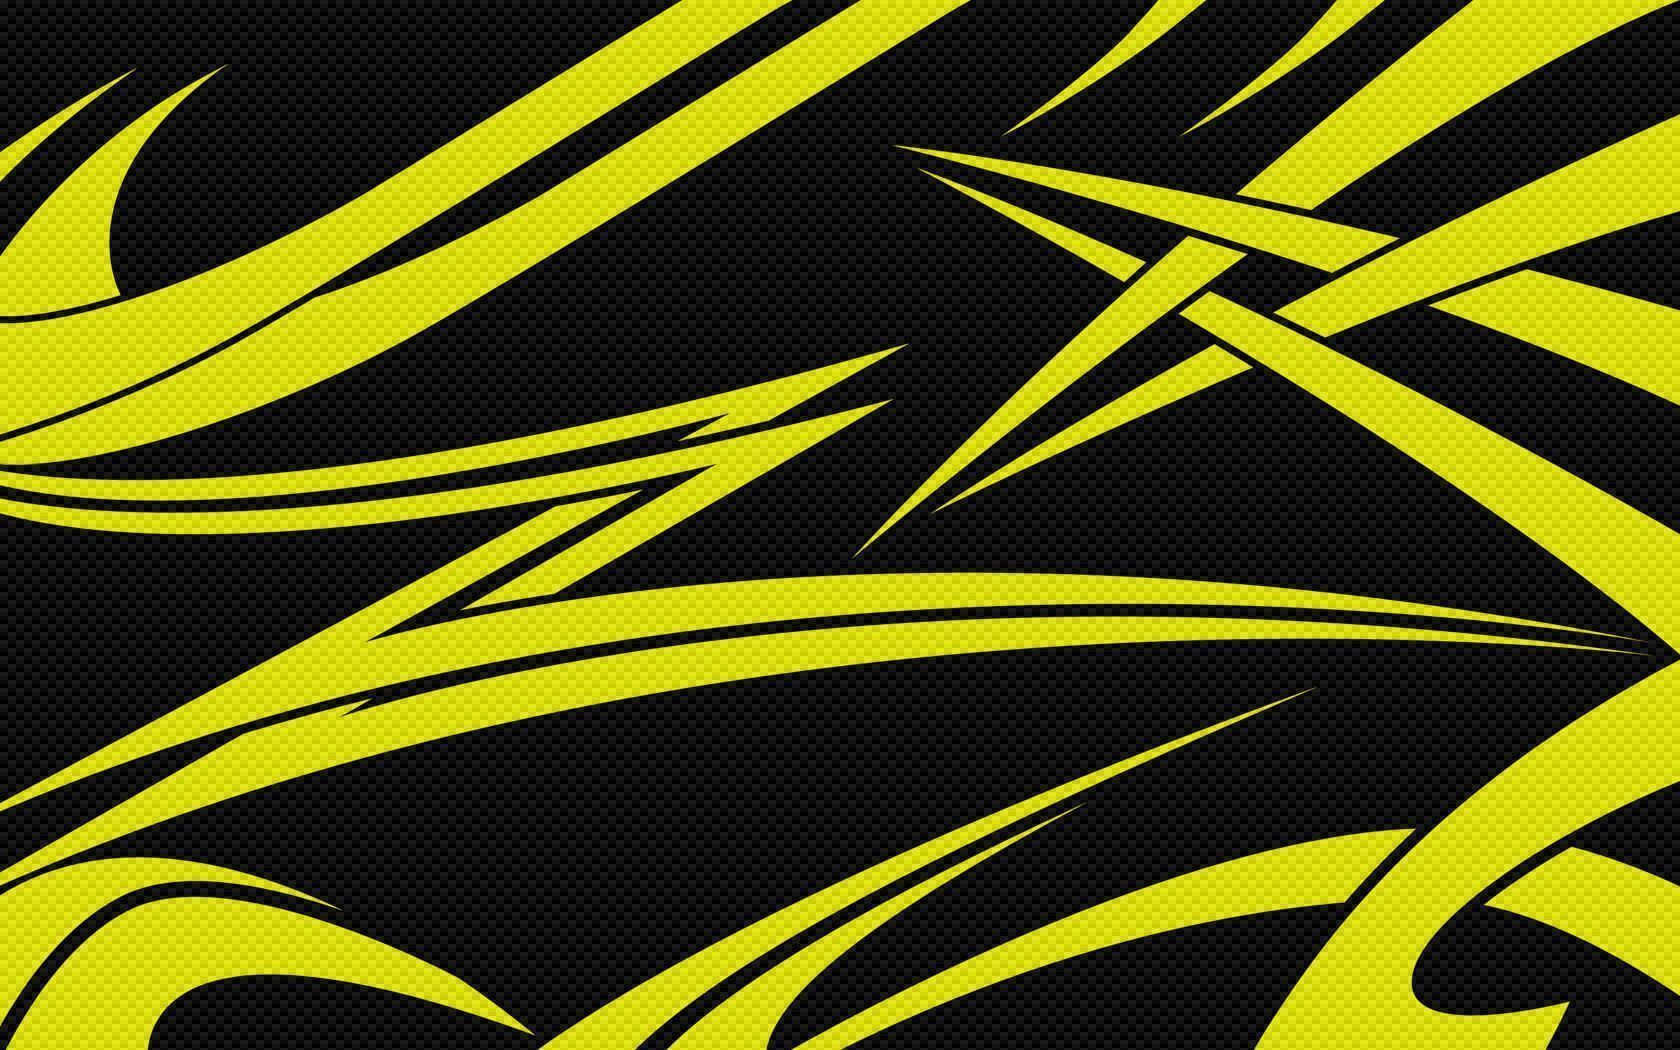 1300x863px 258.6 KB Black And Yellow #343203